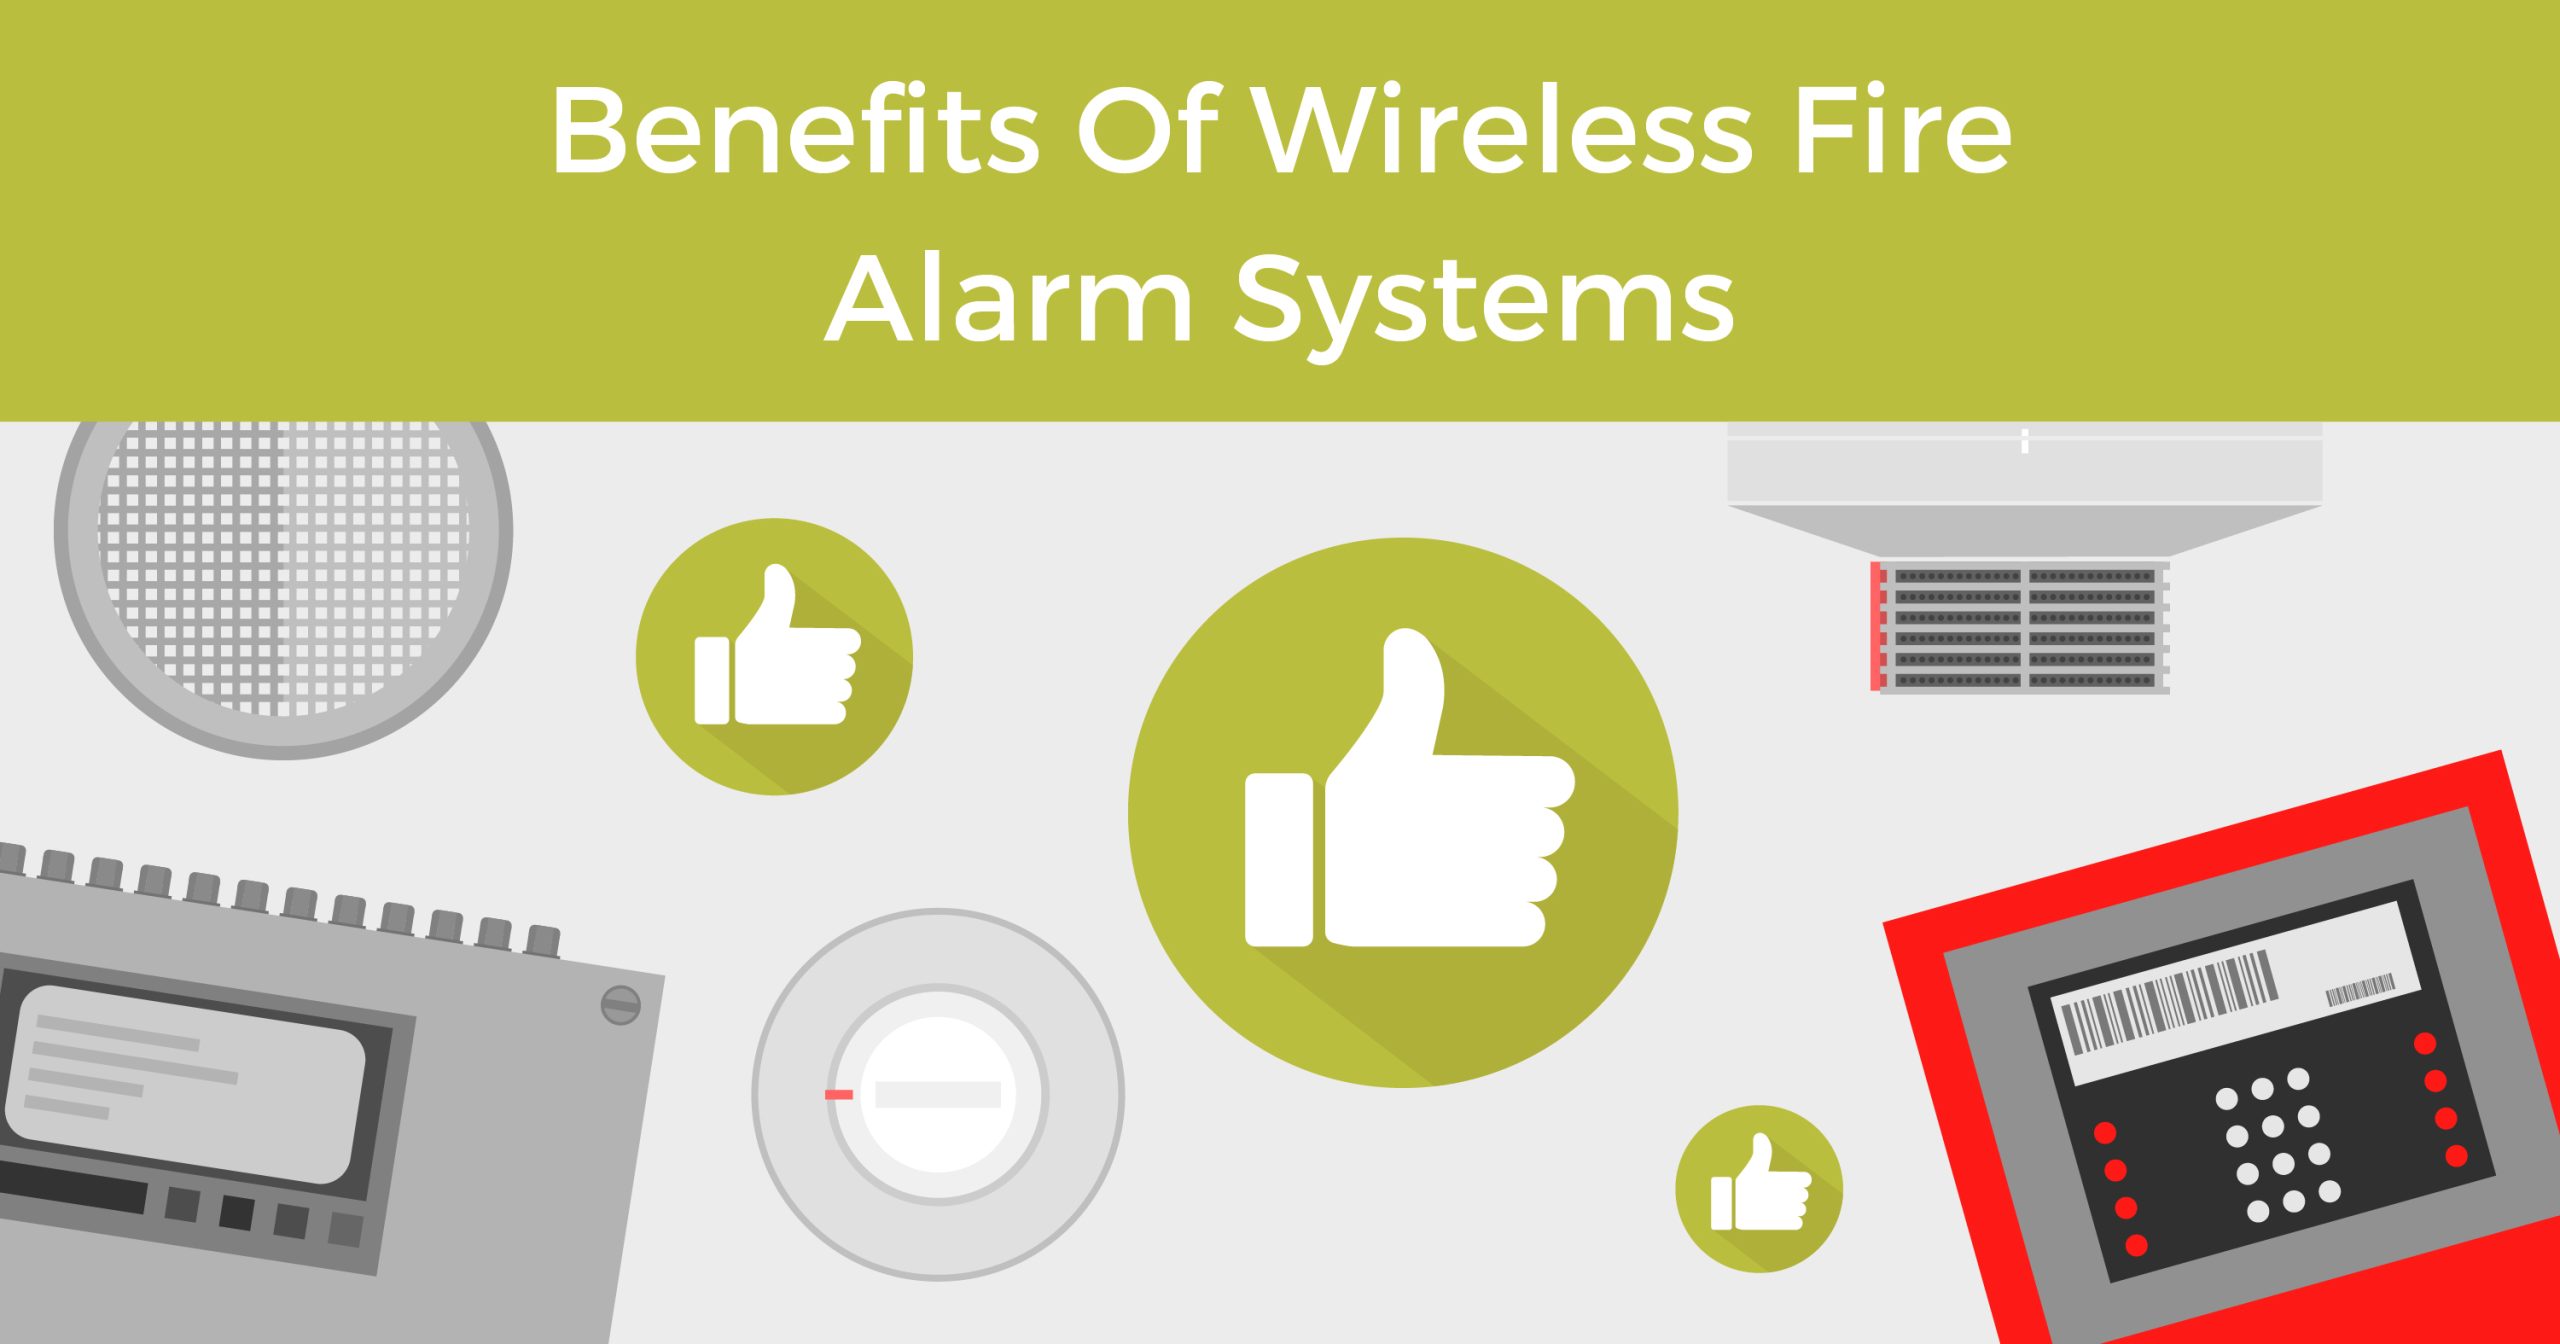 Benefits of wireless fire alarm systems